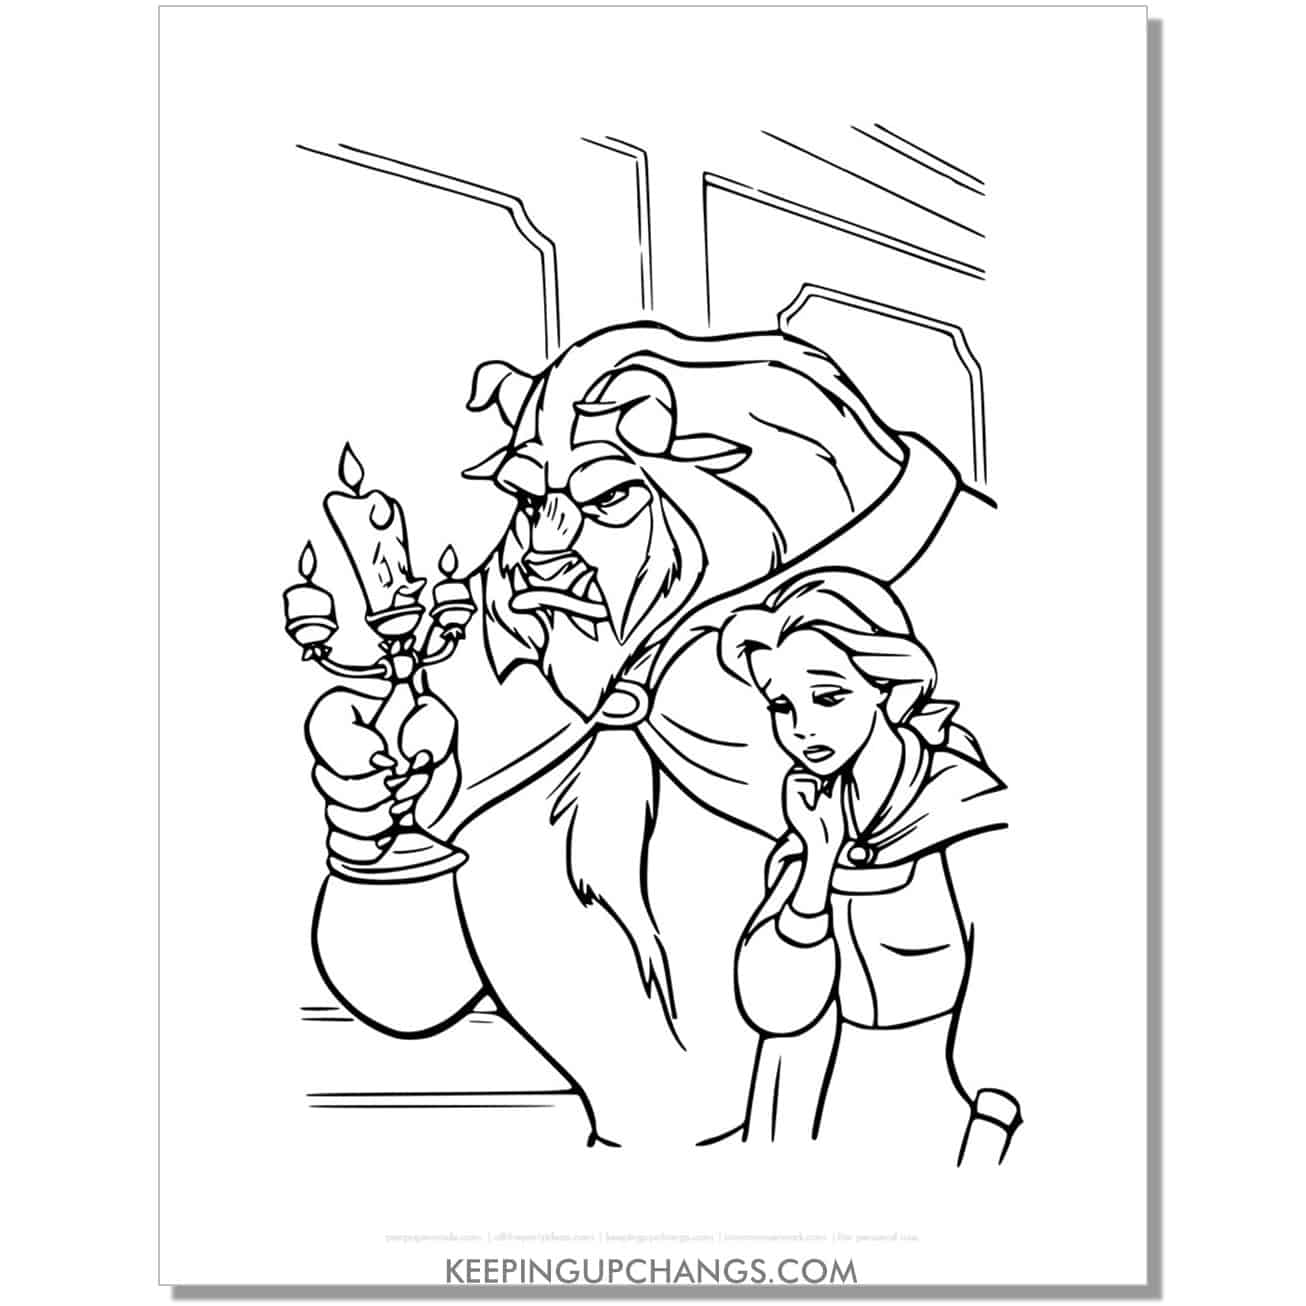 beauty and beast walking in hall somber coloring page, sheet.